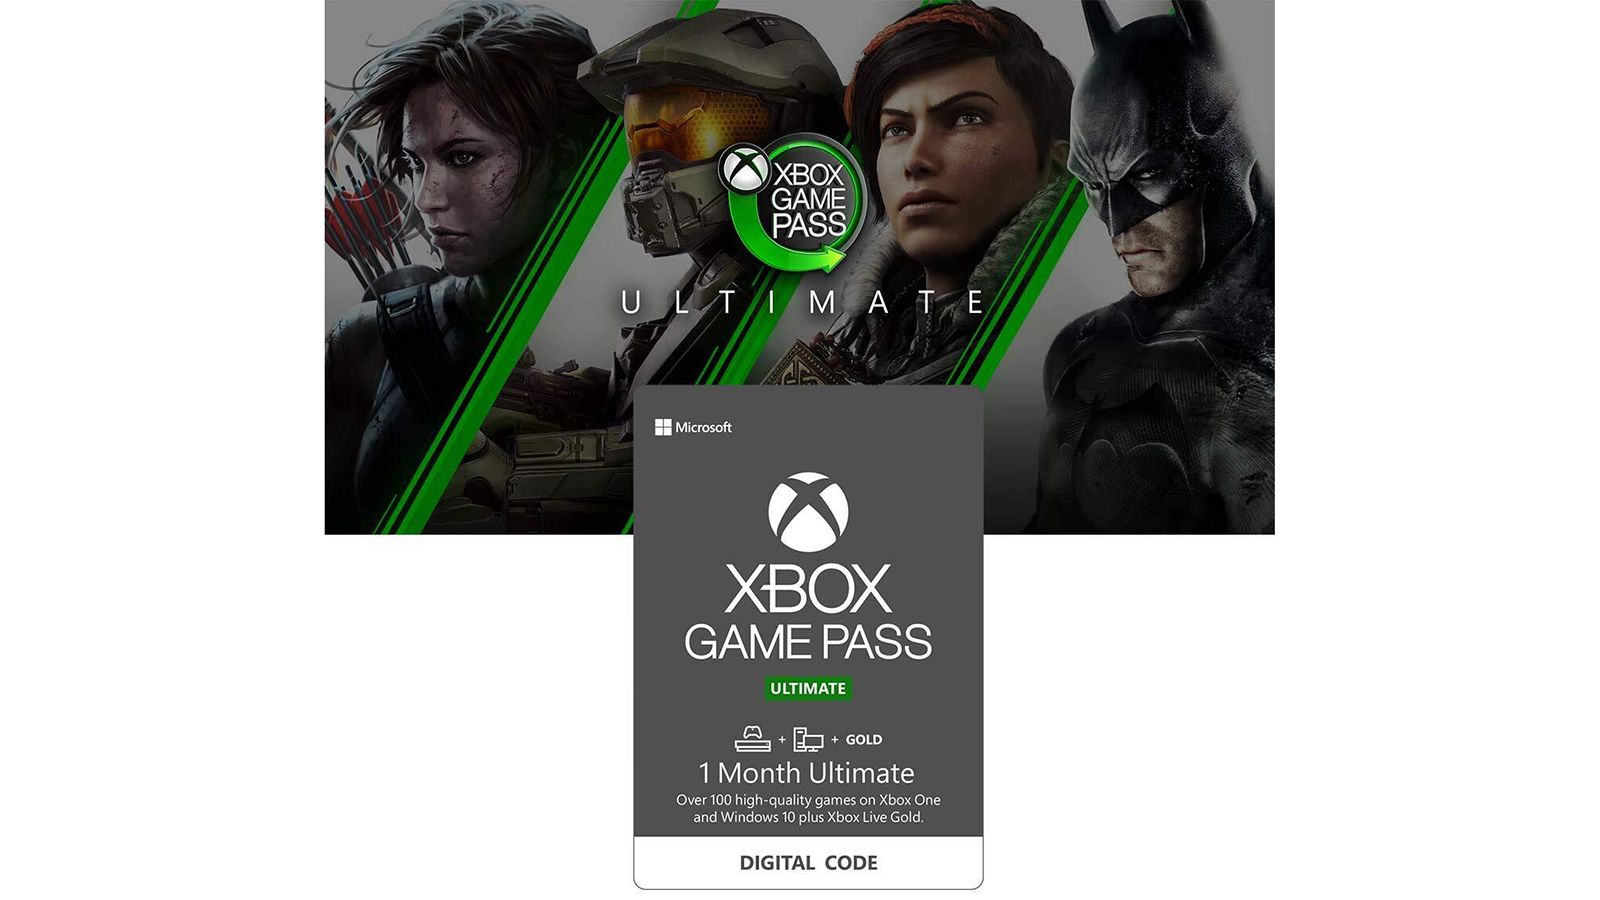 Xbox game services. Xbox game Pass Ultimate 12 месяцев. Xbox game Pass Ultimate 1 month. Xbox game Pass Ultimate 1 месяц. Xbox game Pass Ultimate 2 месяца.